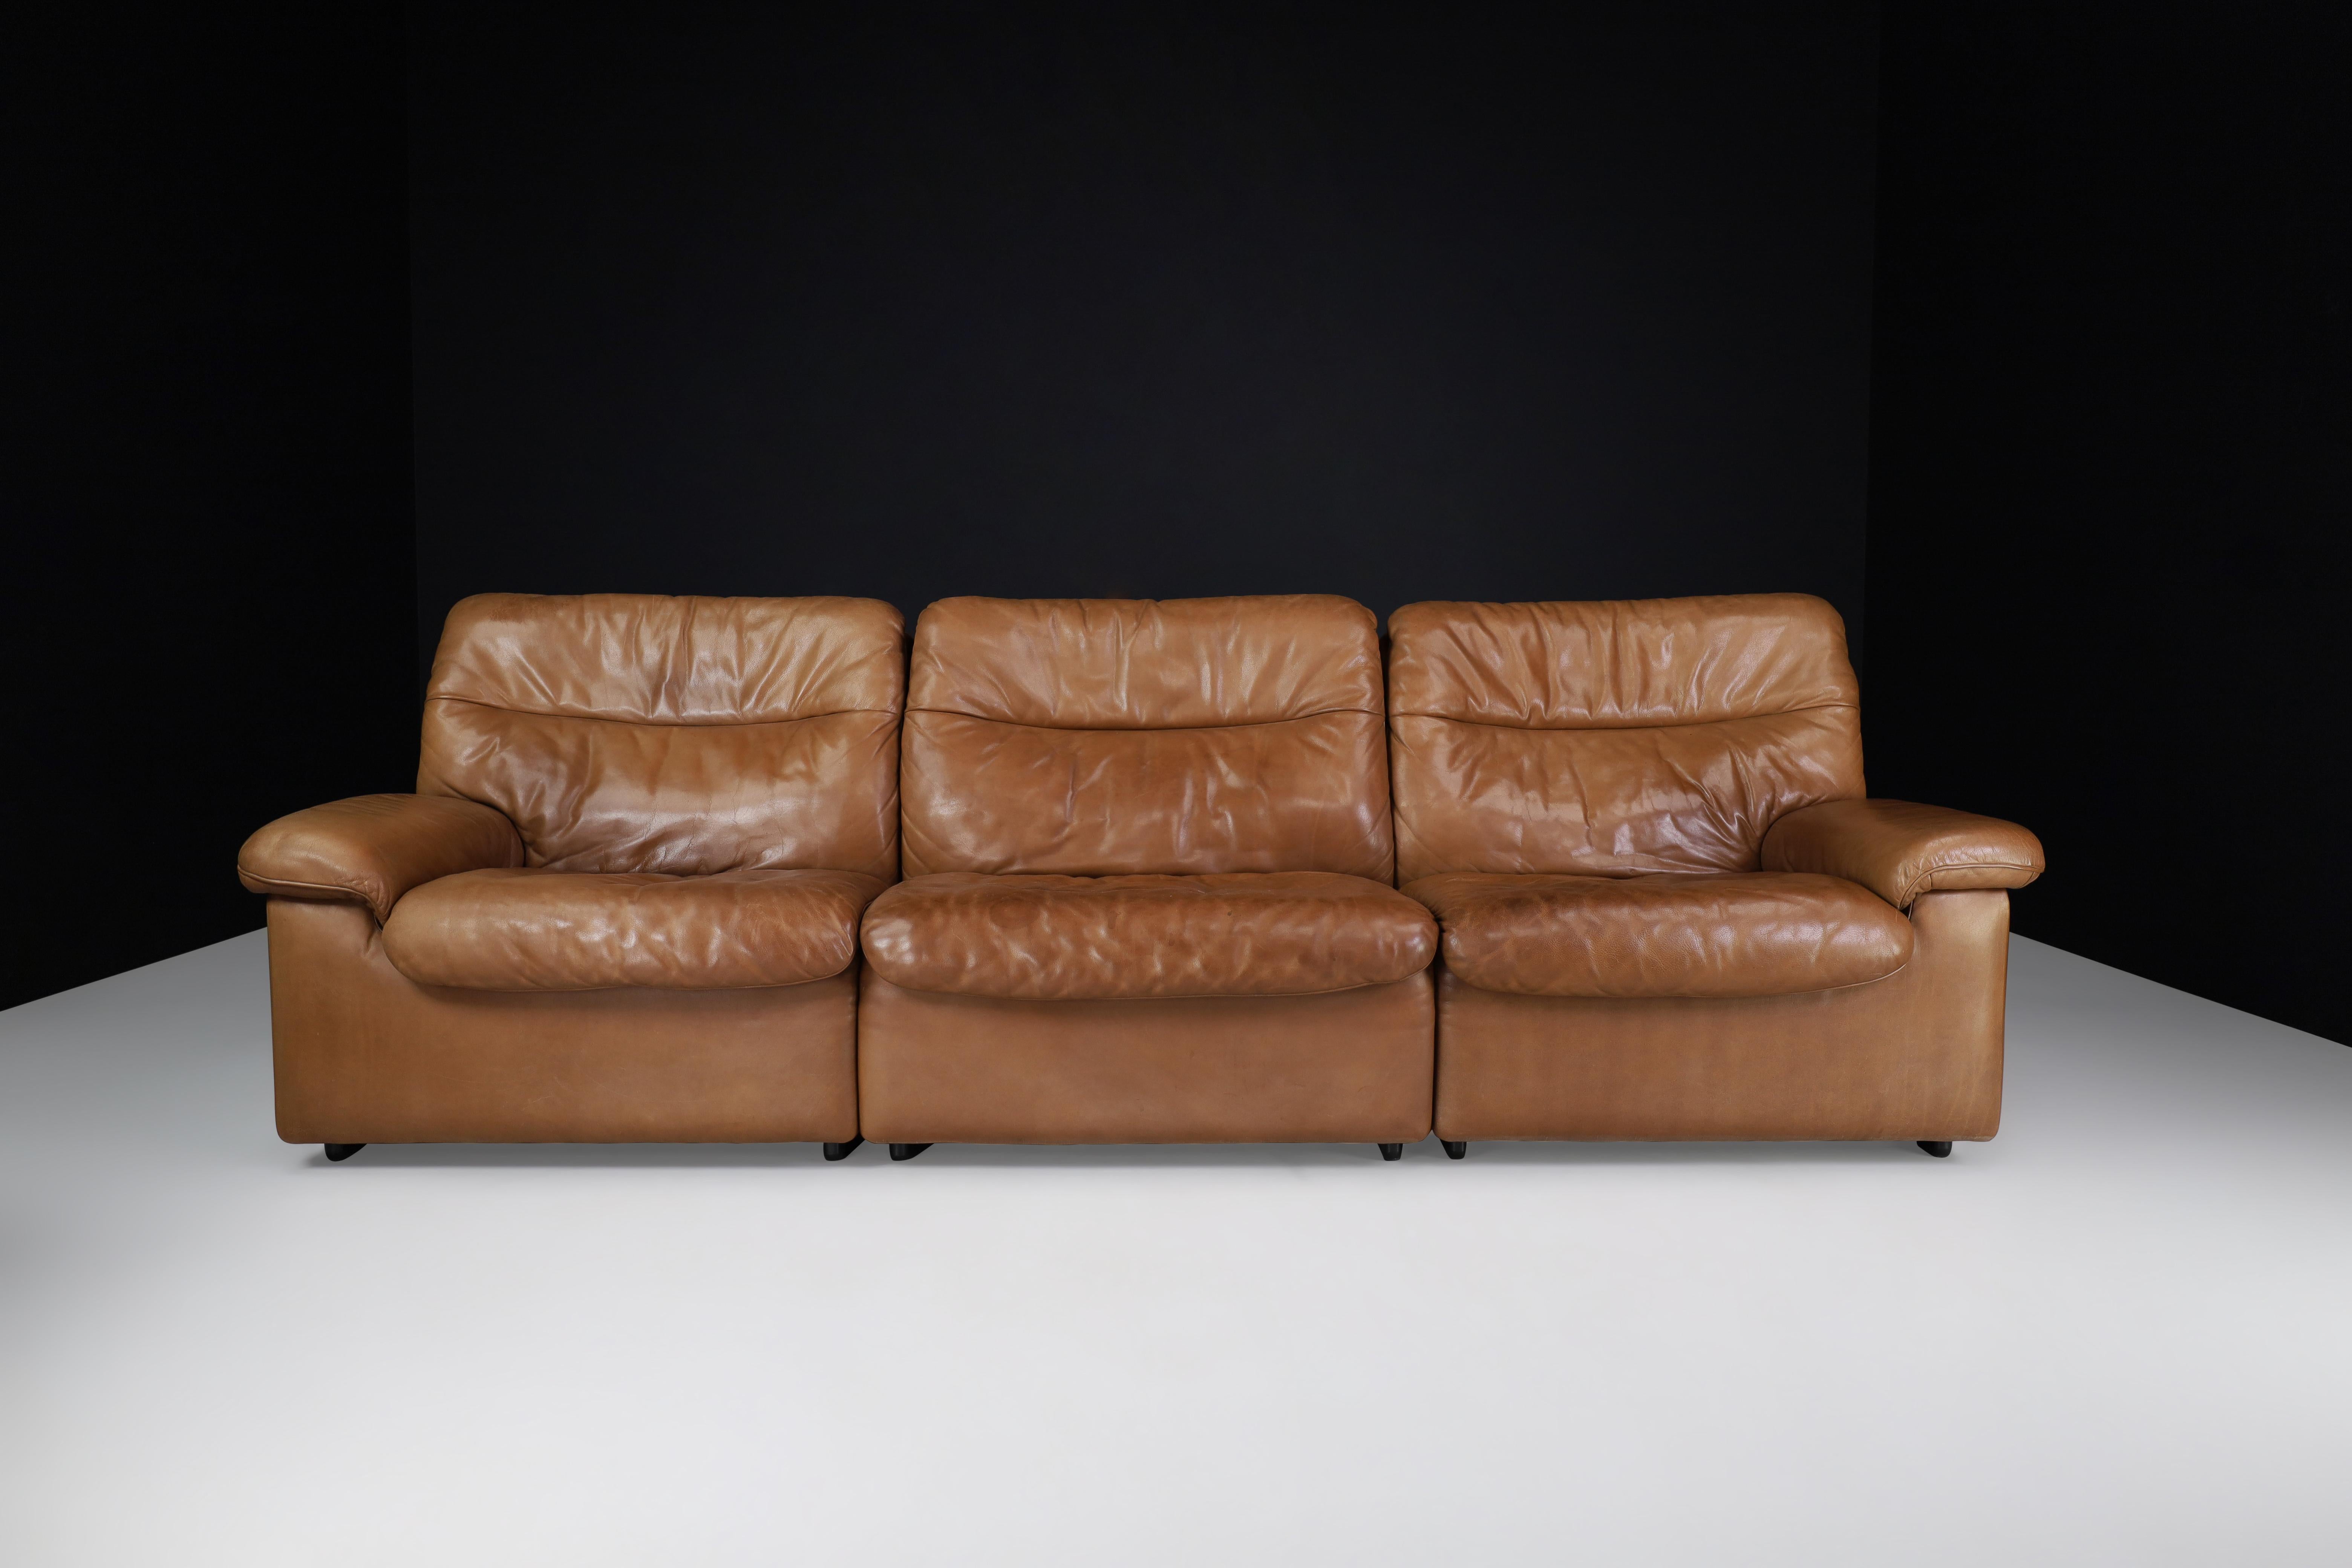 20th Century De Sede Ds 63 Three-Seater Sofa in Patinated Leather, Switzerland, 1970s For Sale